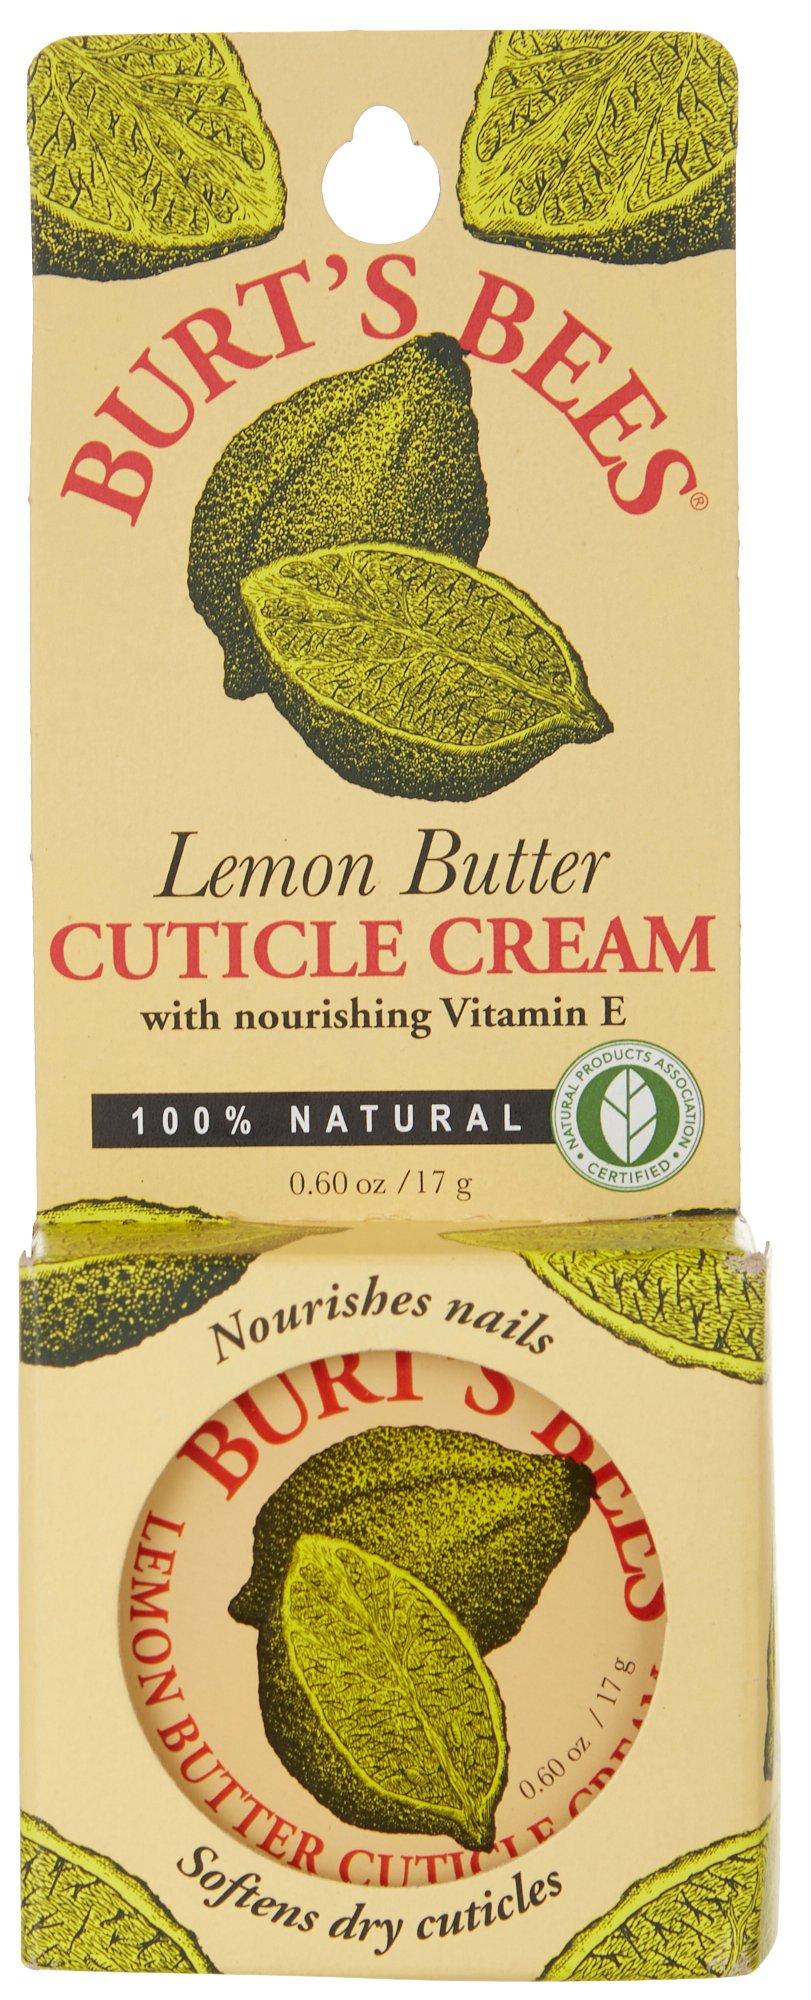 Lemon Butter Cuticle Cream For Nails